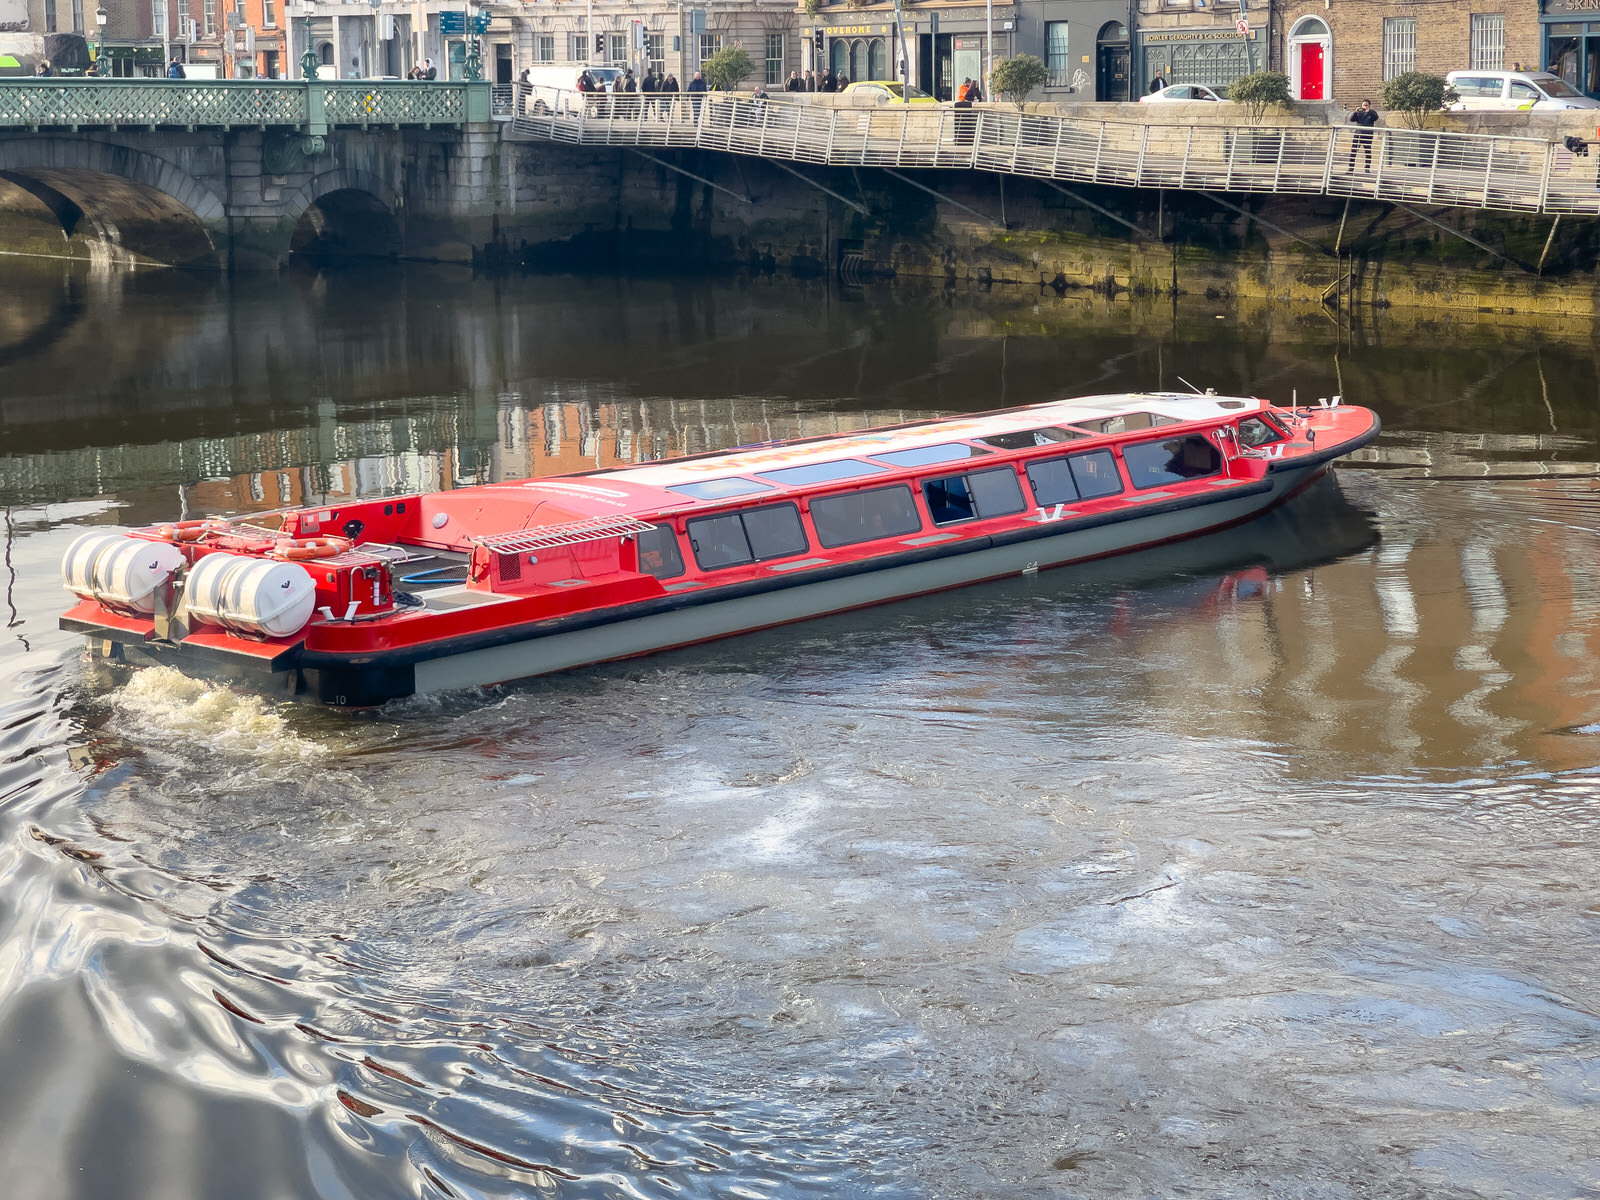 I HAD NOTHING BETTER TO DO [SO I PHOTOGRAPHED THE SPIRIT OF THE DOCKLANDS TURNING ON THE RIVER LIFFEY]-229454-1